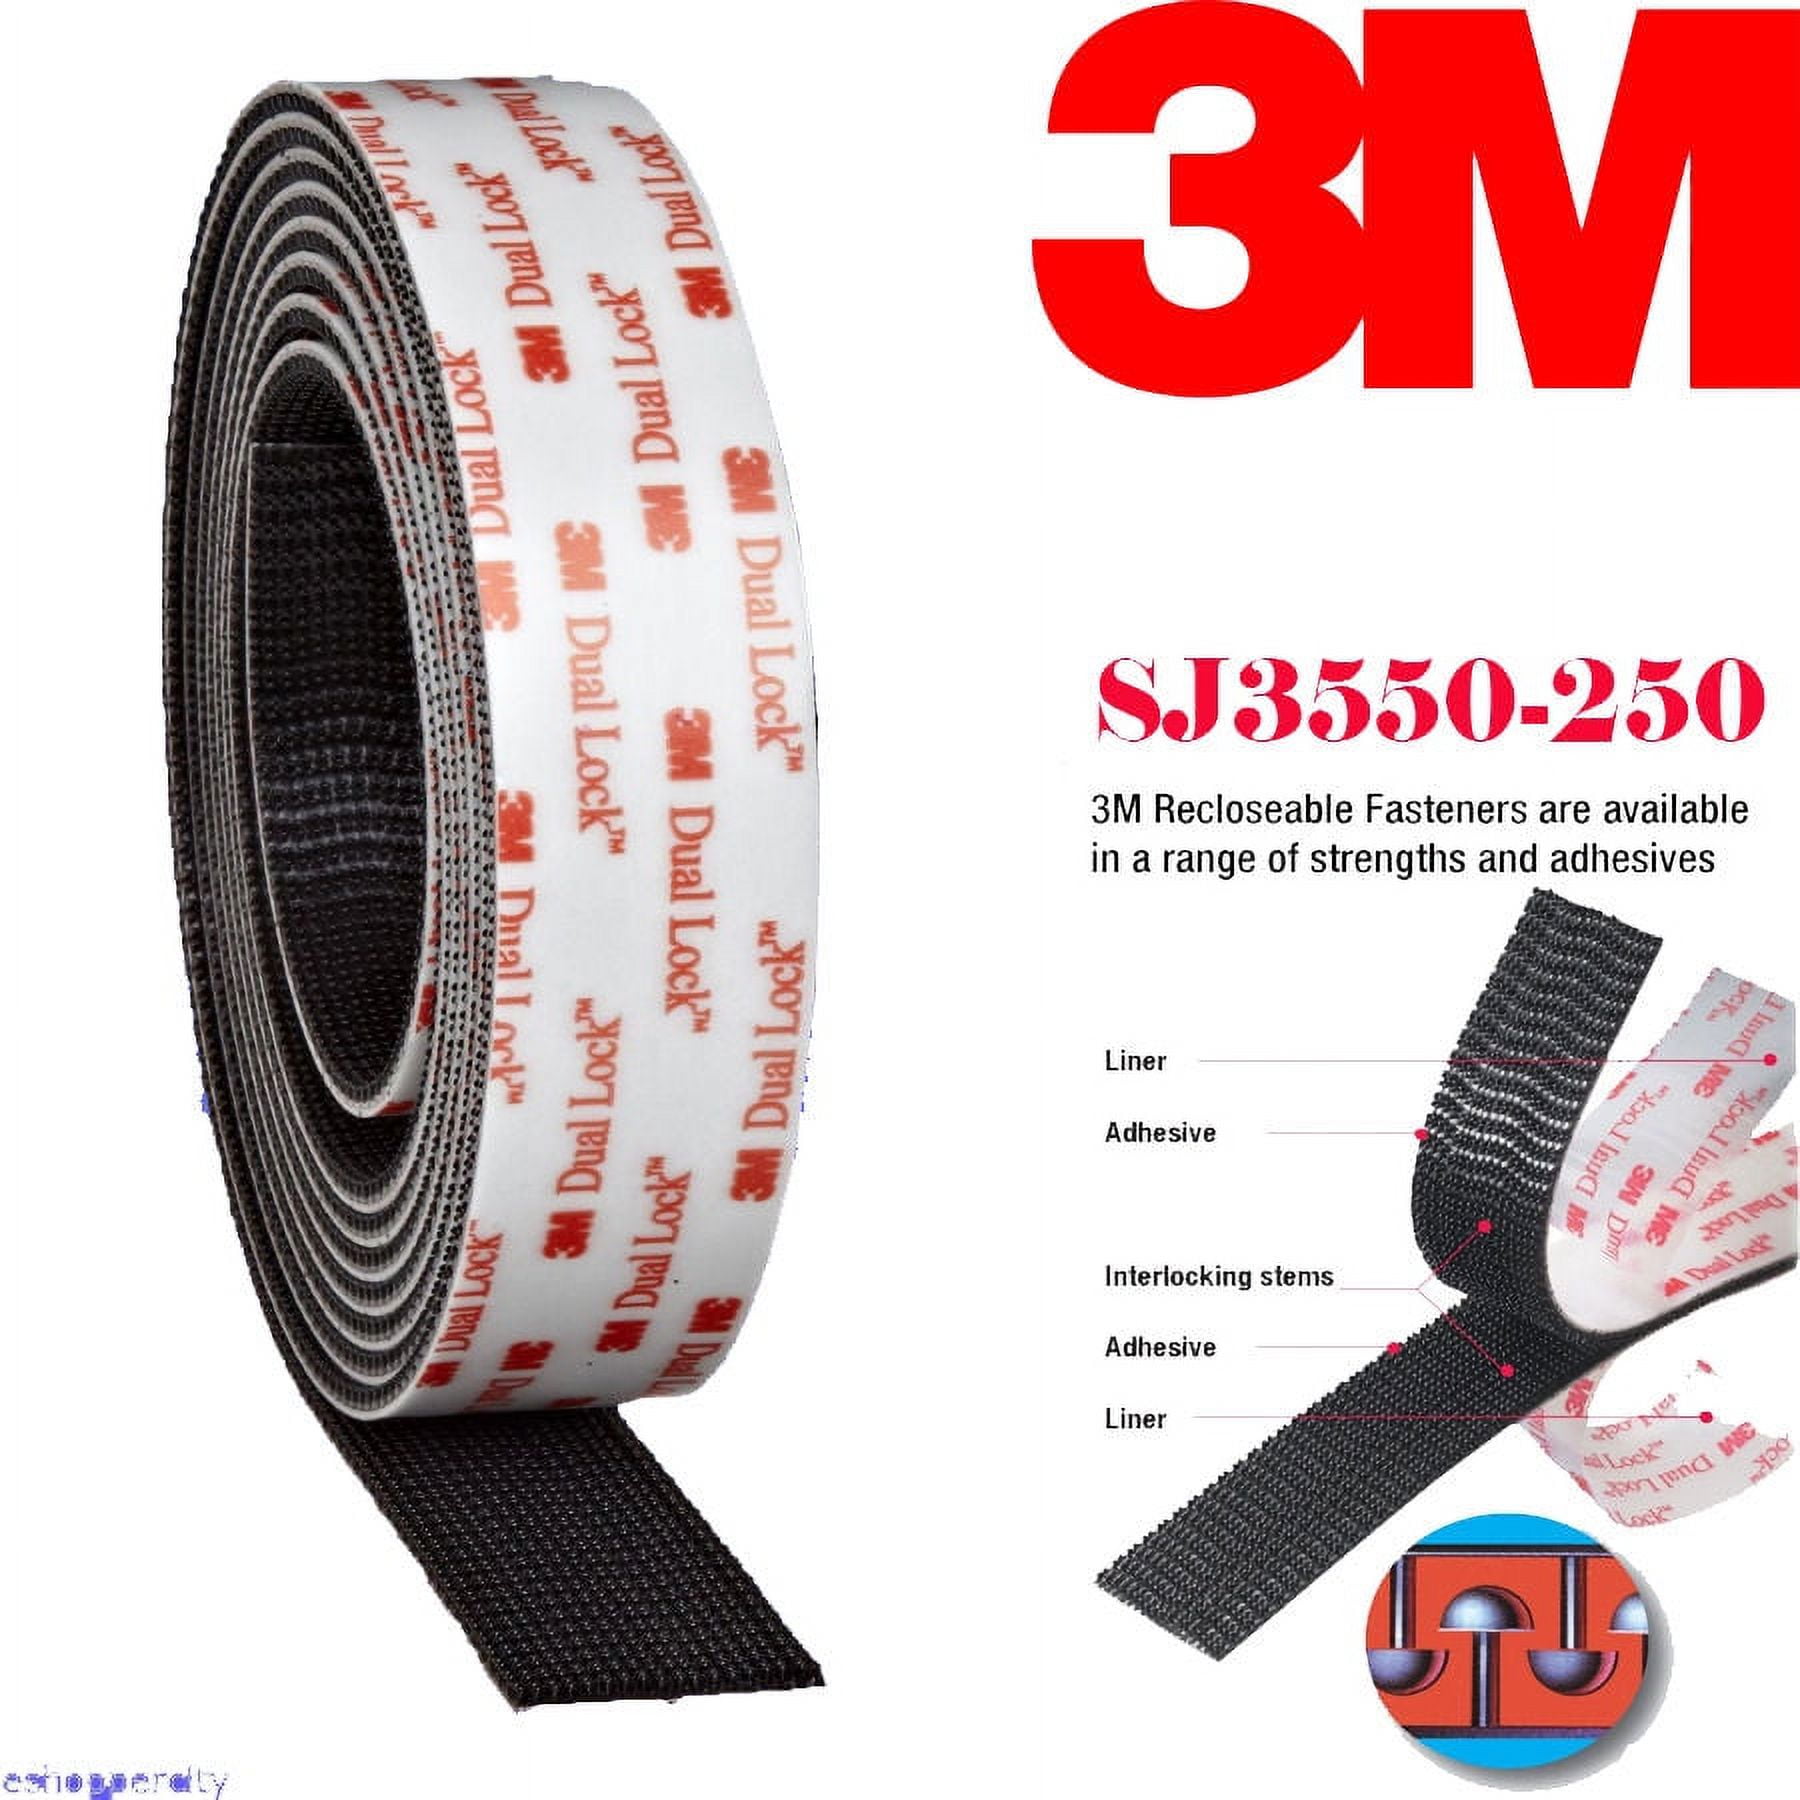 3M Reclosable Fasteners for Automotive